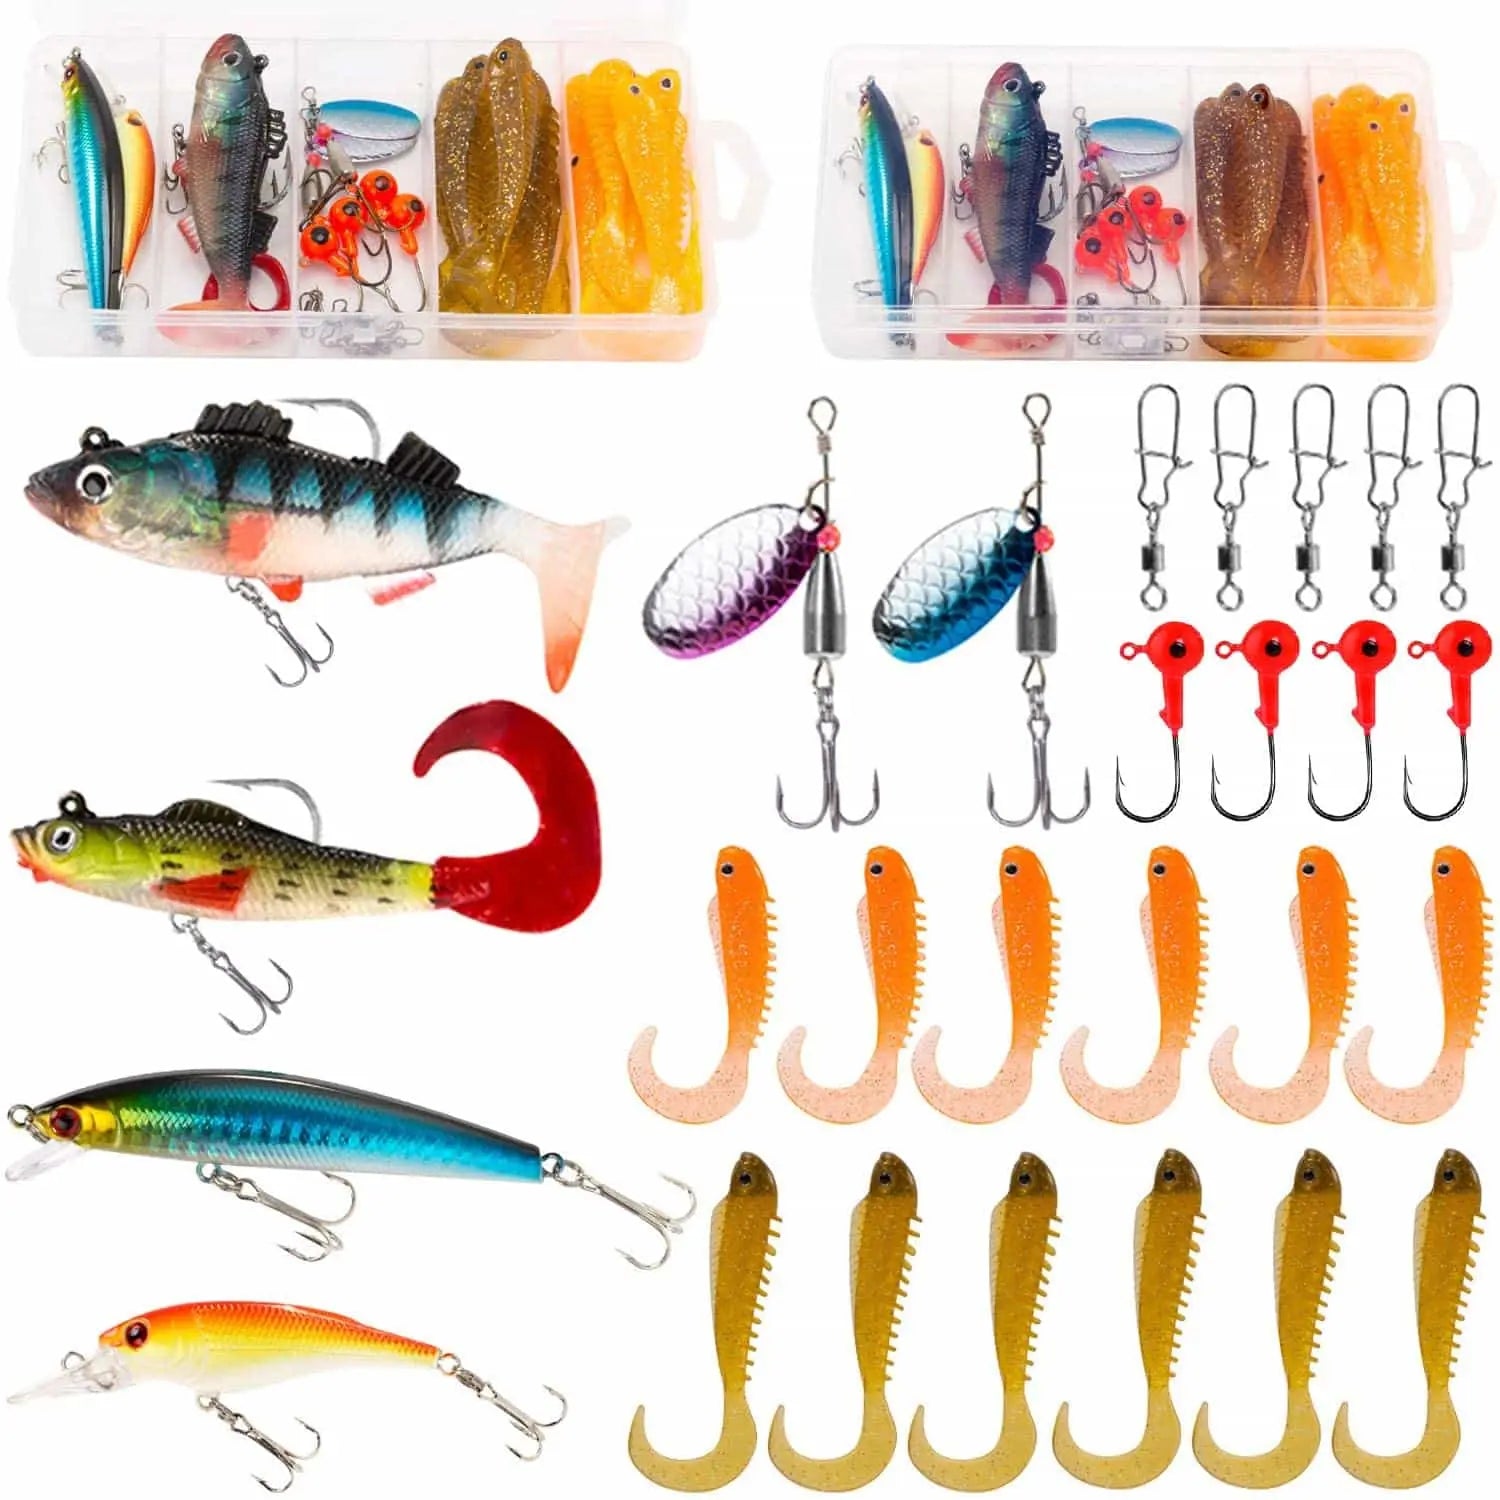 PLUSINNO Fishing Lures Baits Tackle Including Crankbaits, Spinnerbaits,  Plastic Worms, Jigs, Topwater Lures, Tackle Box and More Fishing Gear Lures  Kit Set, 210Pcs Fishing Lure Tackle…: Buy Online at Best Price in